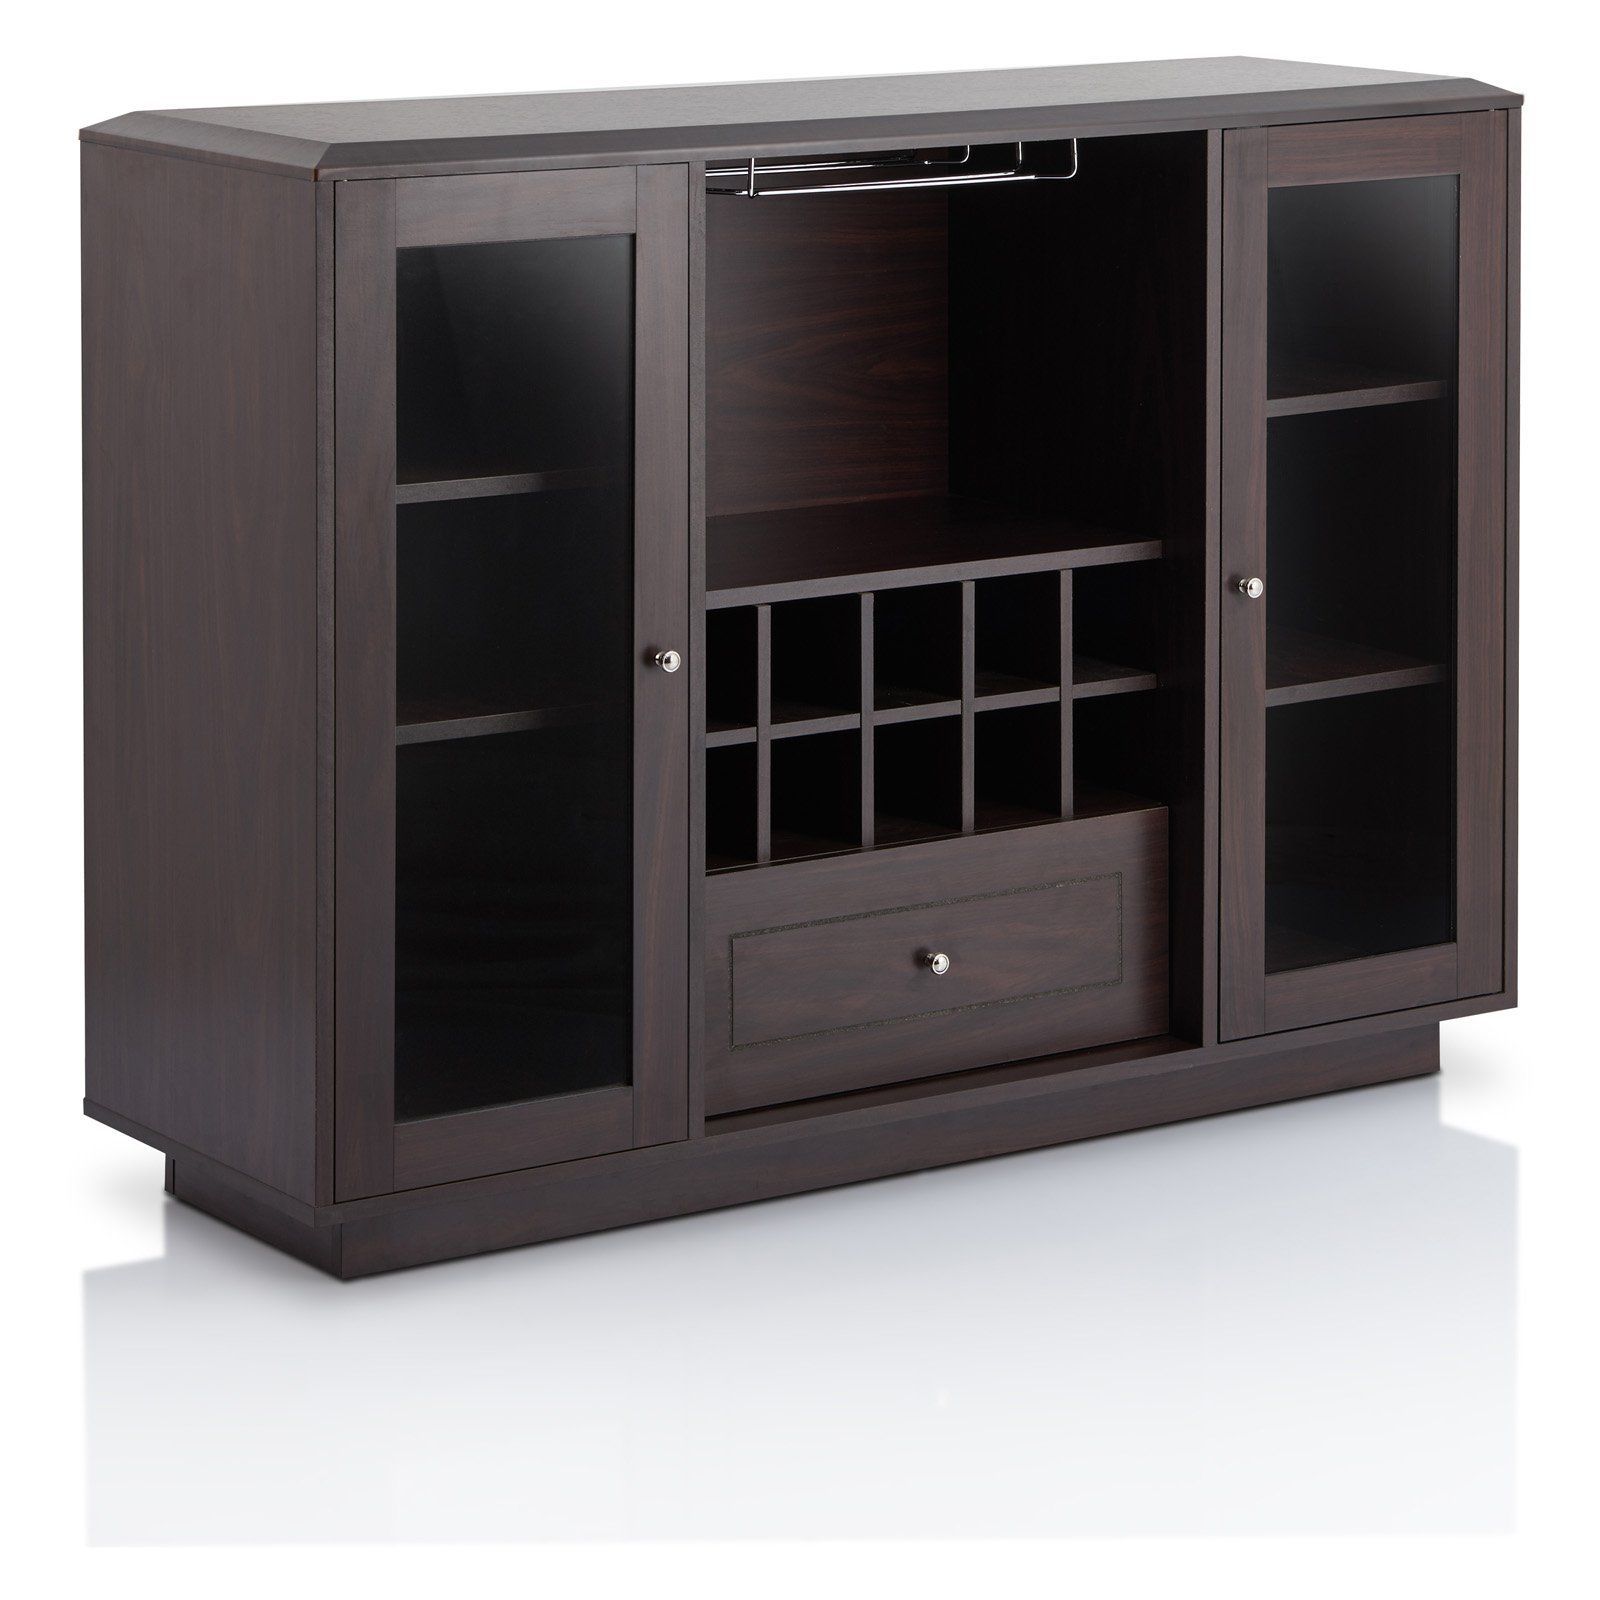 Furniture Of America Kenna Espresso Contemporary Multi Intended For Contemporary Espresso Dining Buffets (Photo 5 of 30)